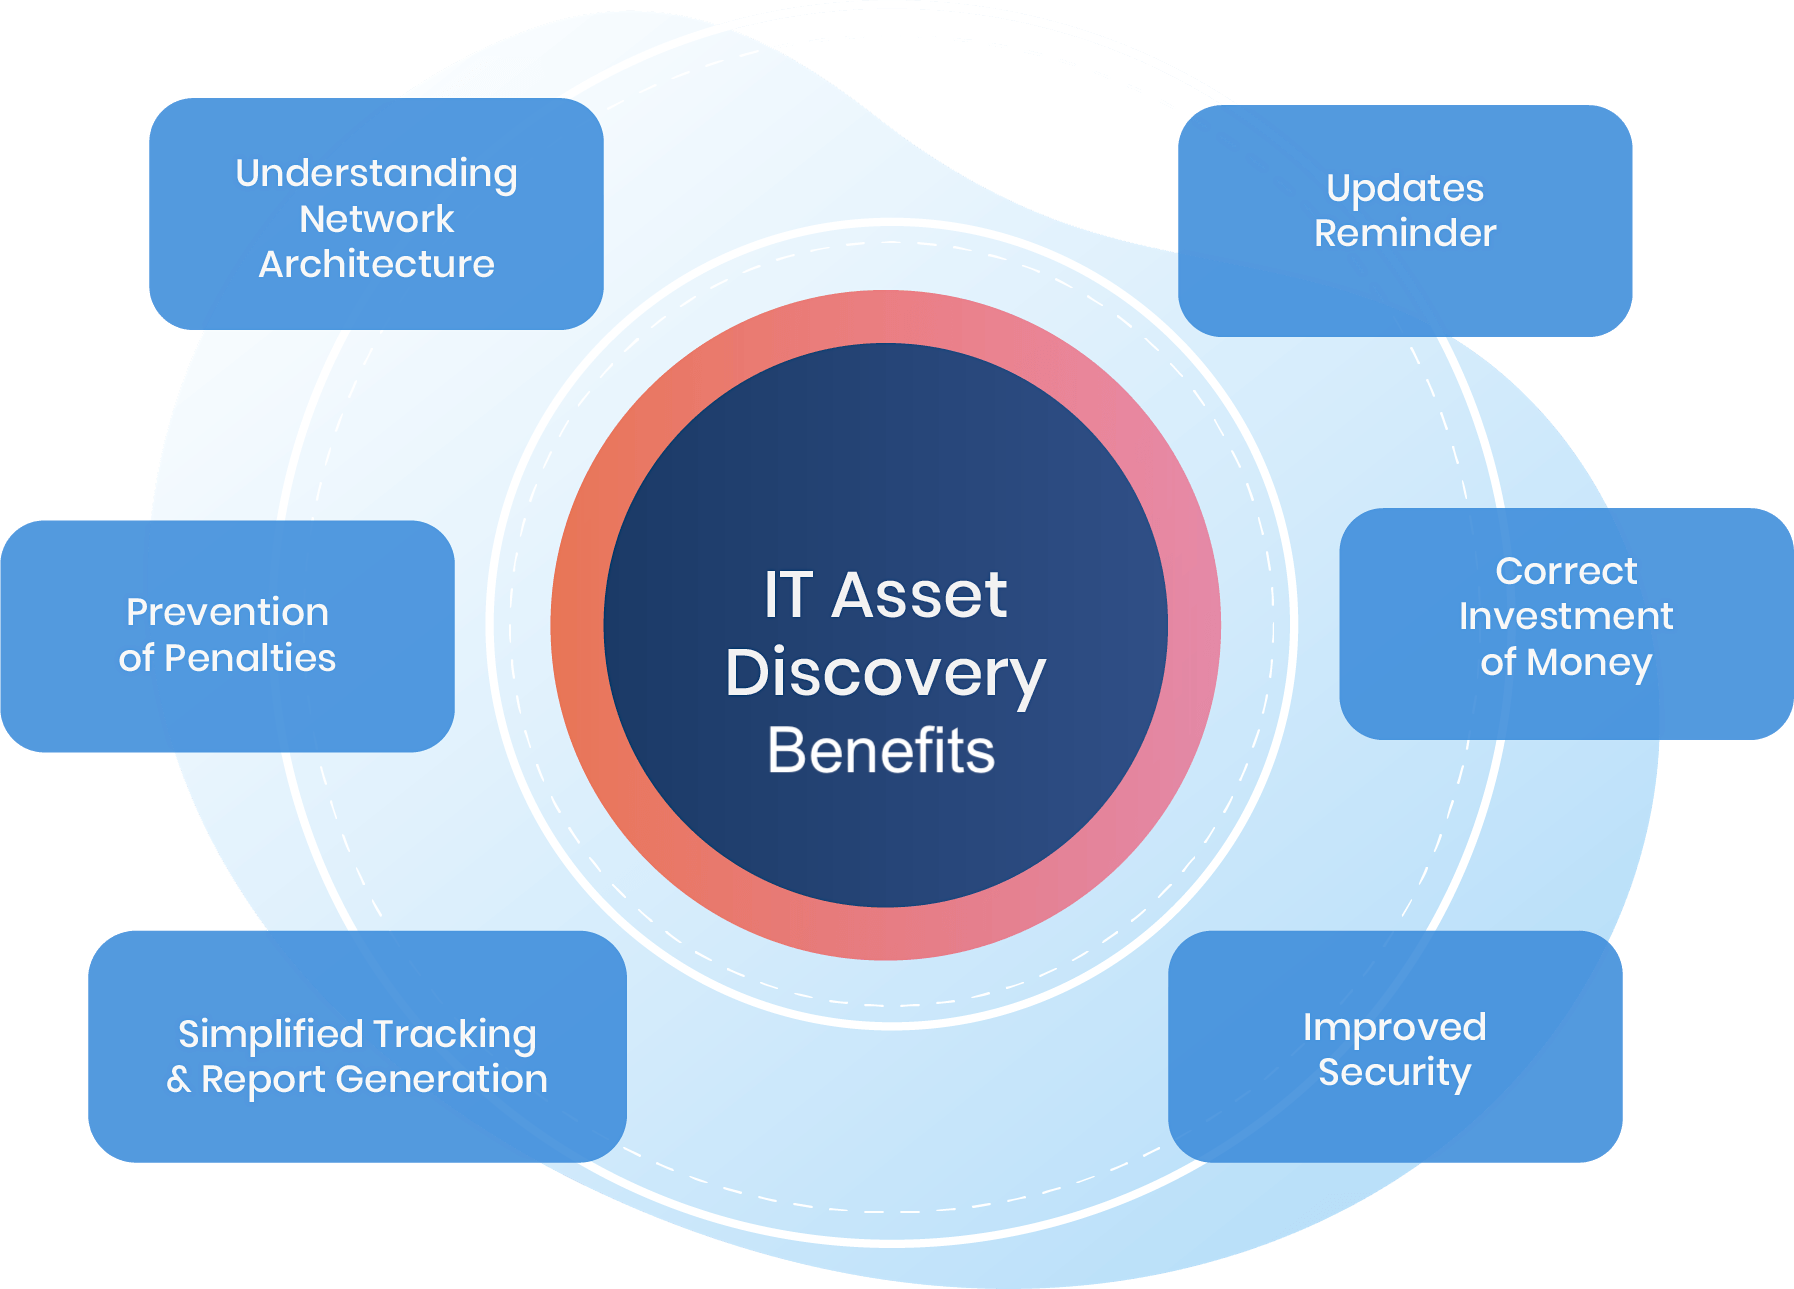 IT Asset Discovery Benefits